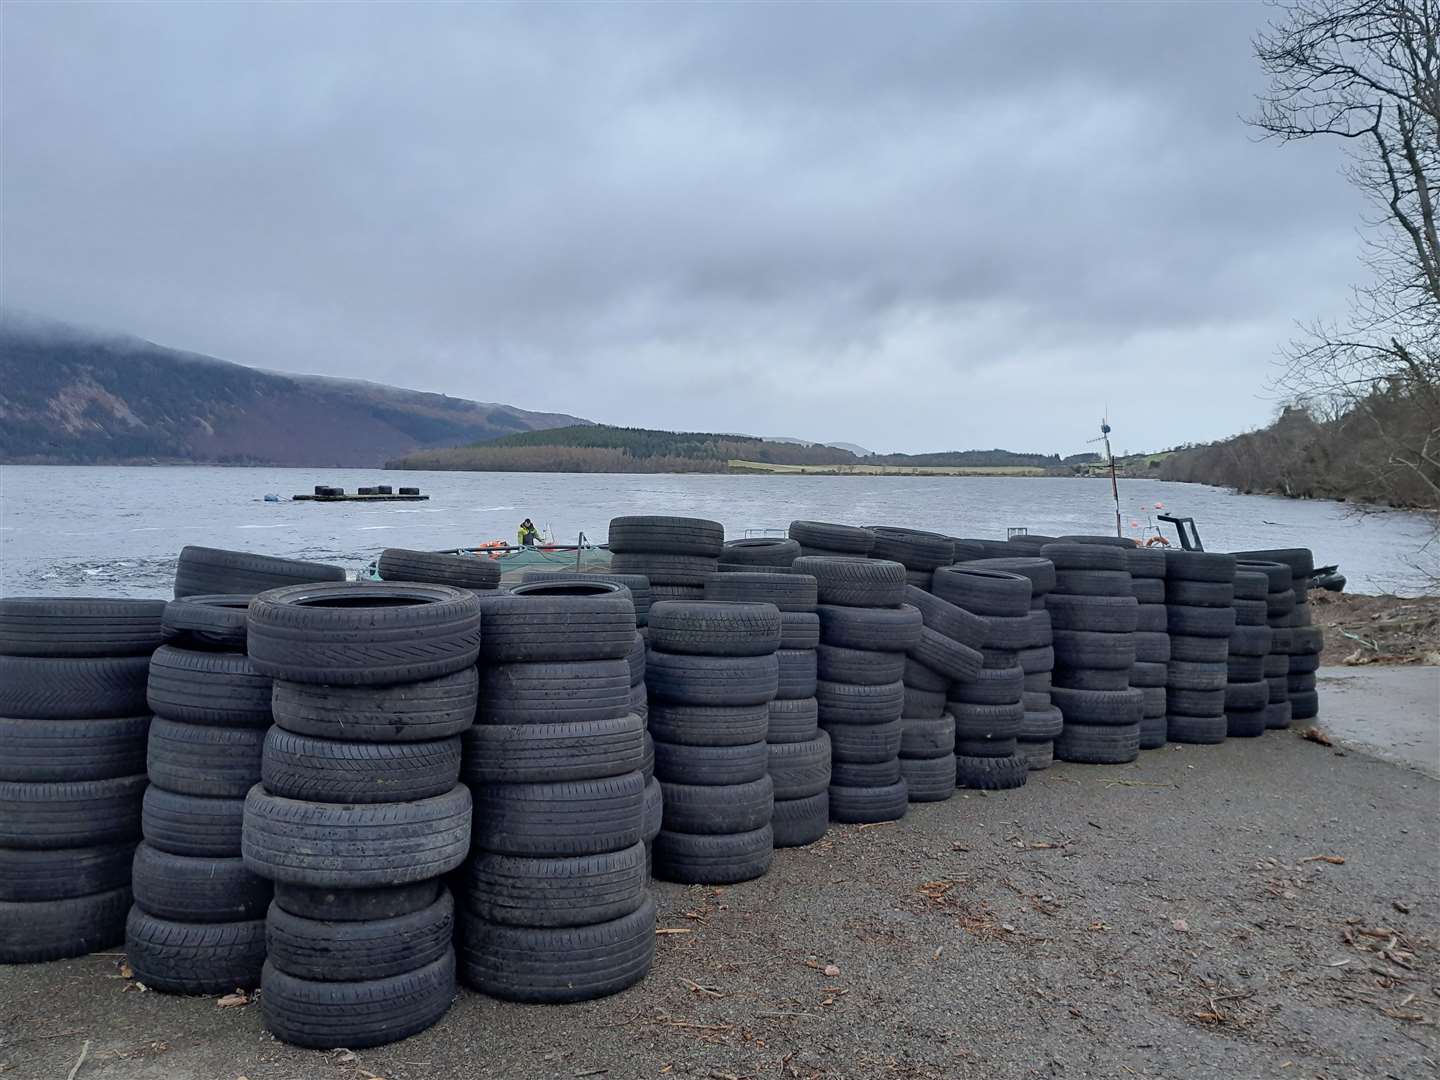 More than 300 tyres were collected after being dumped at Loch Ness.